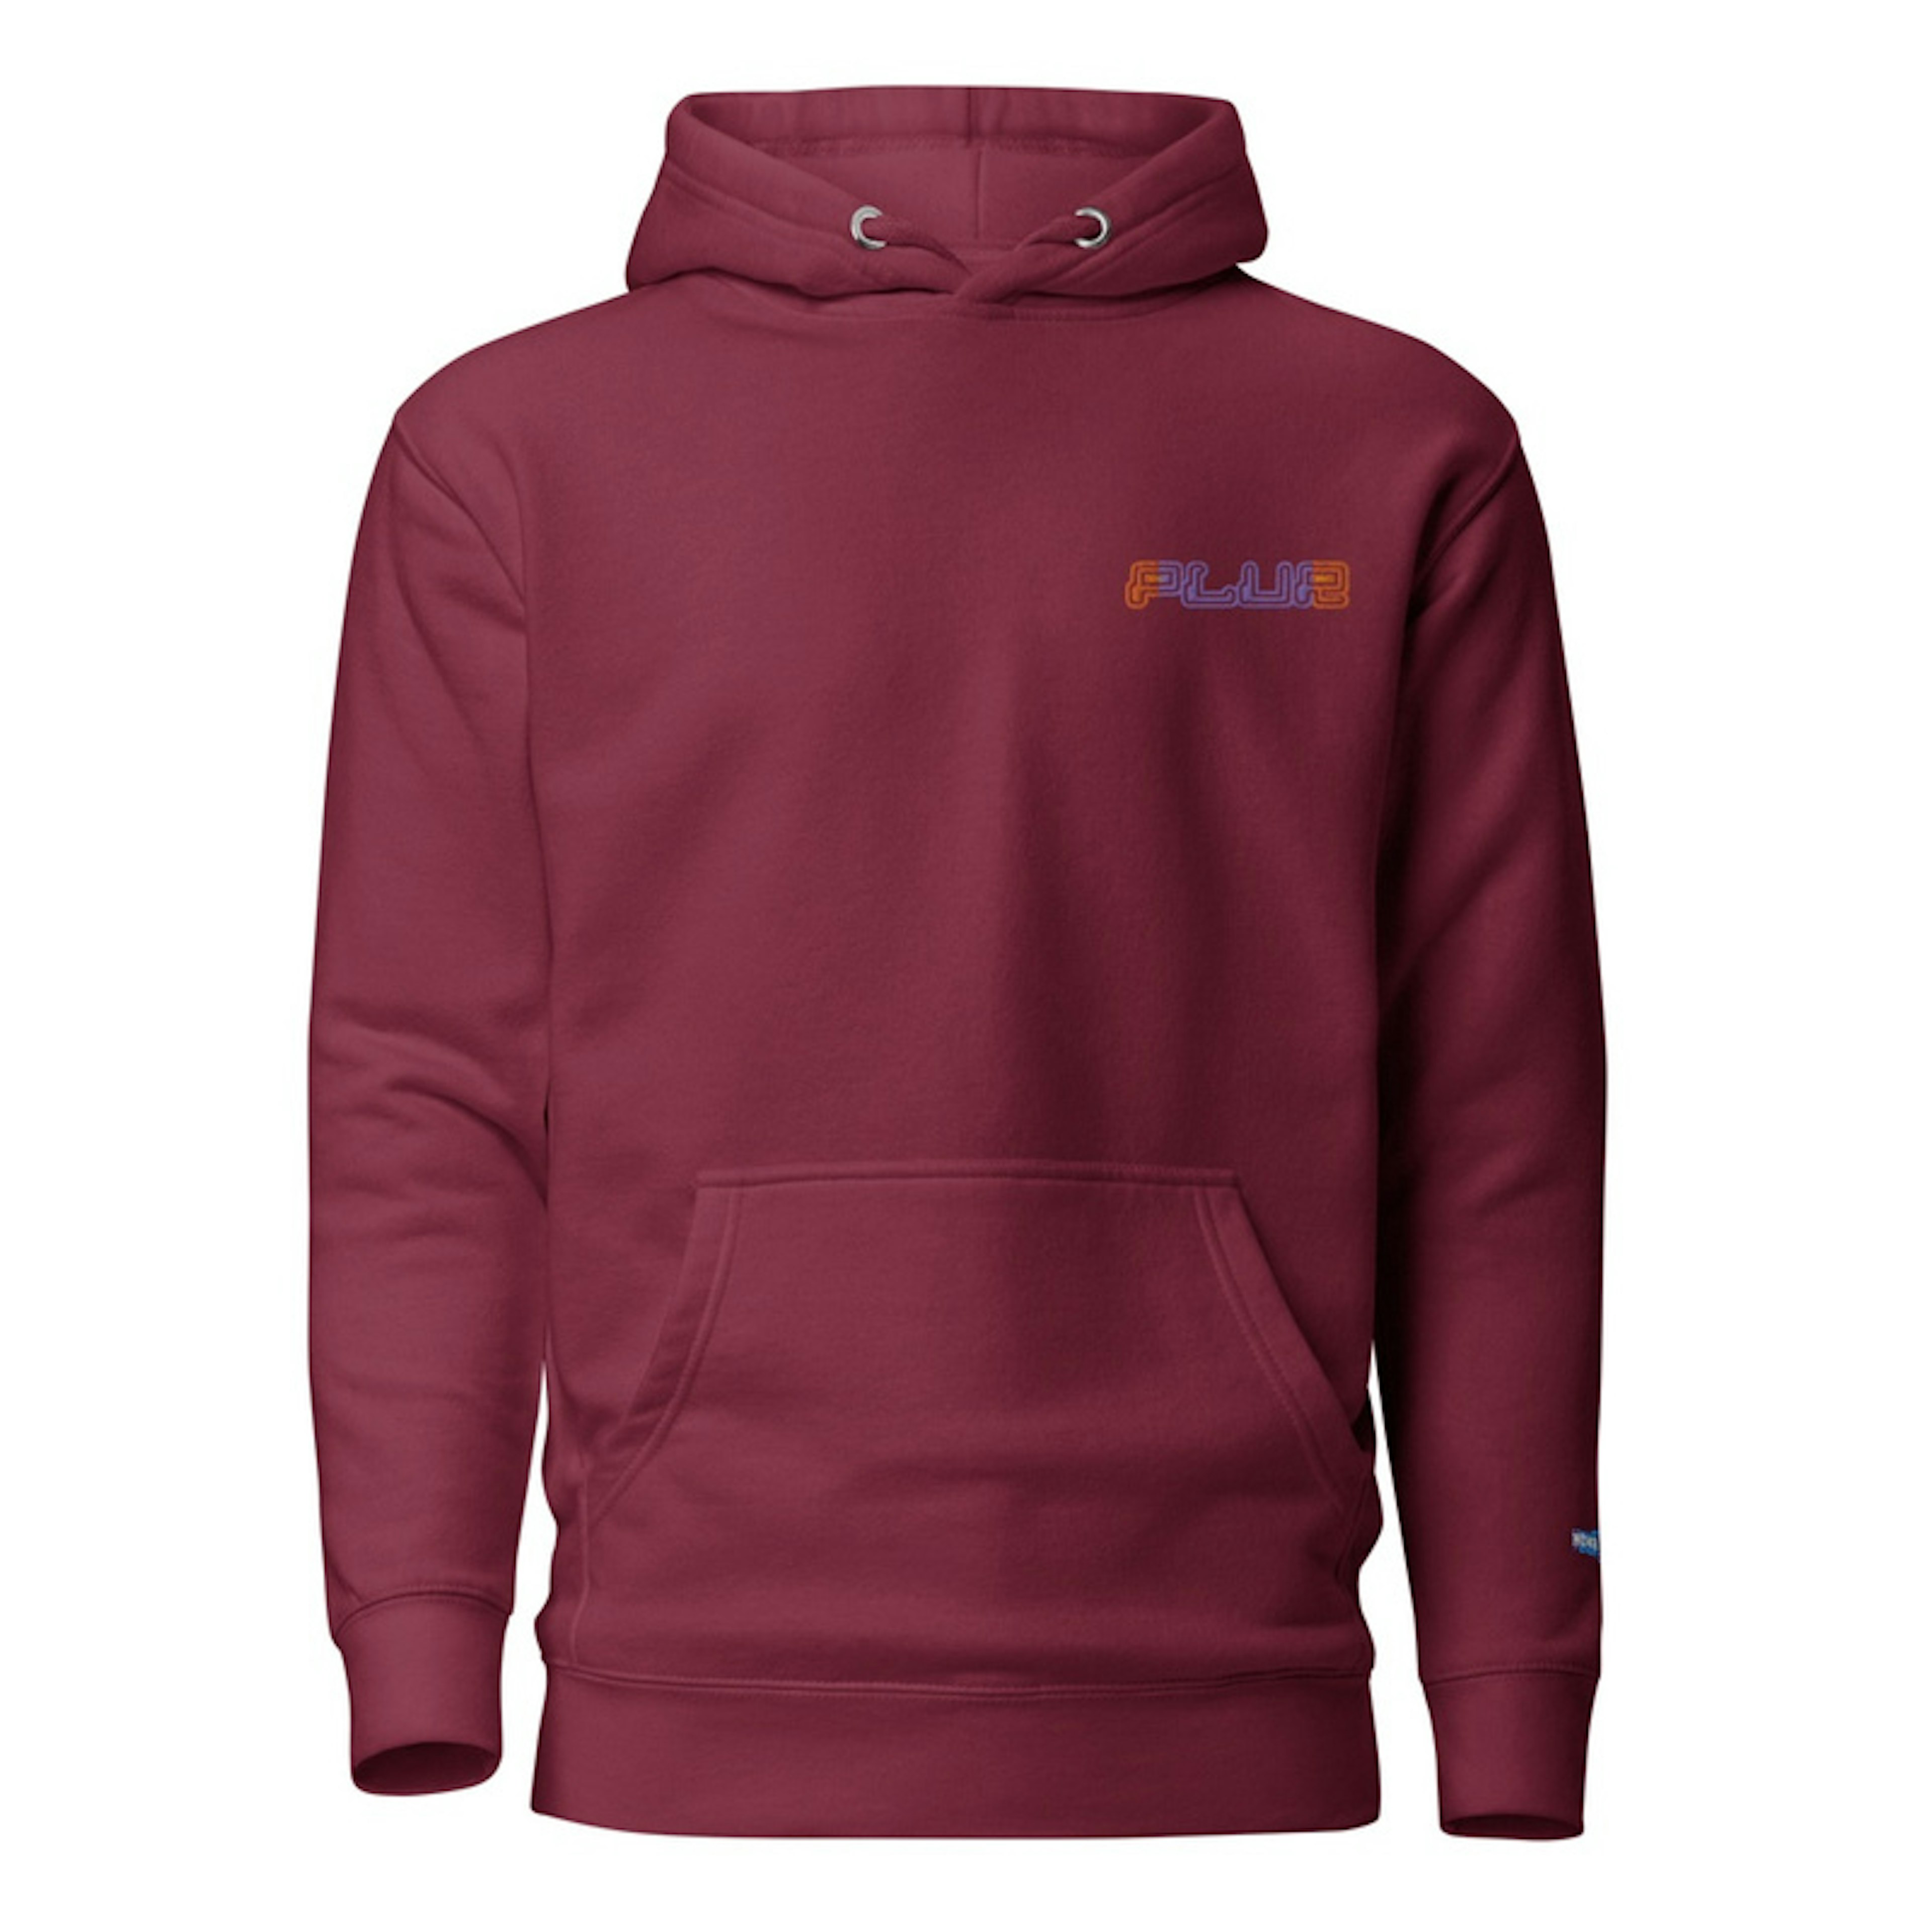 PLUR Embroidered Soft-Wash Hoodie